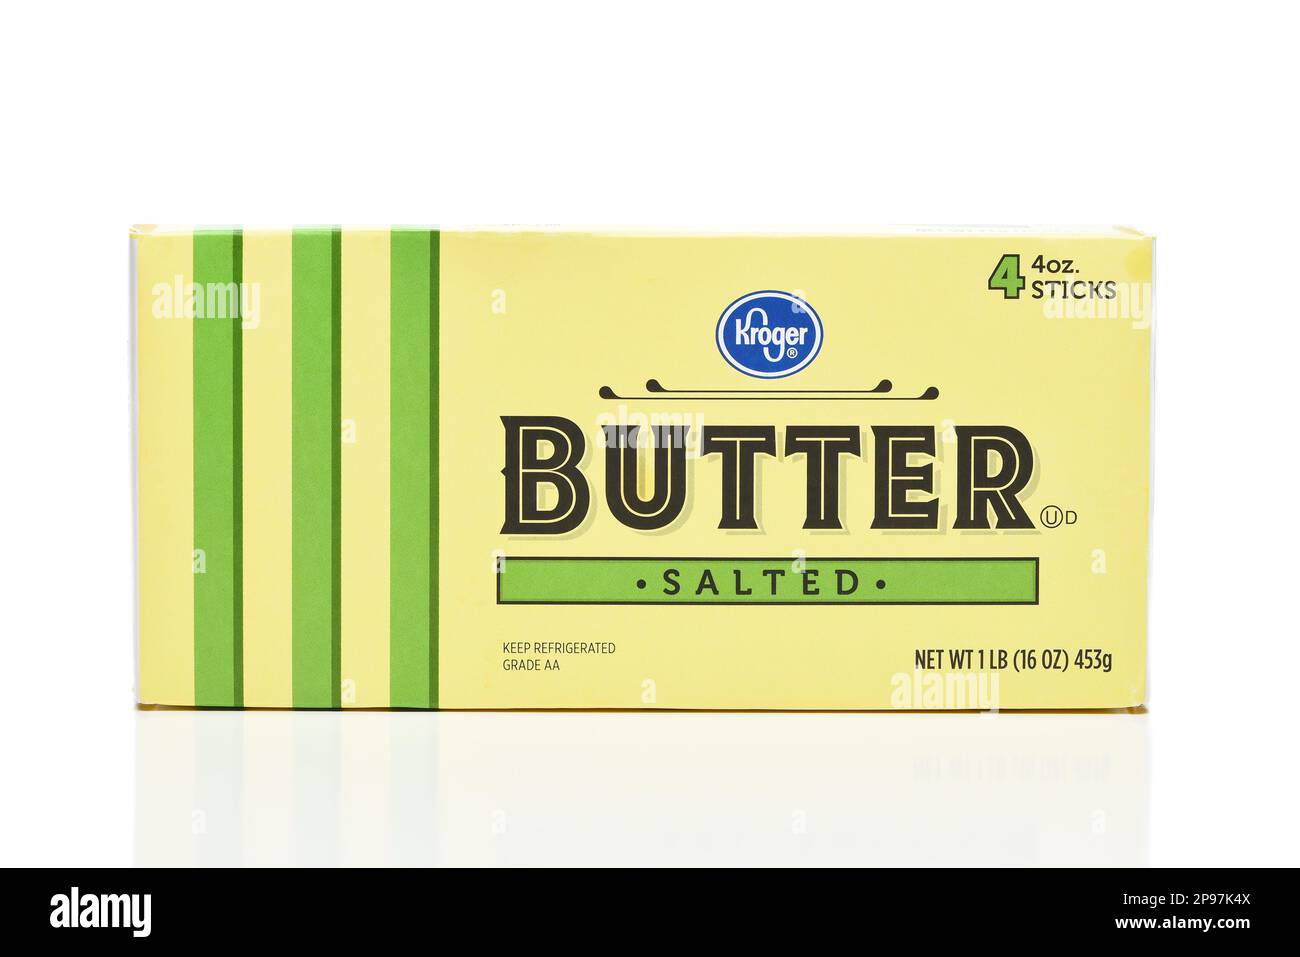 IRVINE, CALIFORNIA - 10 MAR 2023: A package of Kroger brand Salted Butter. Stock Photo